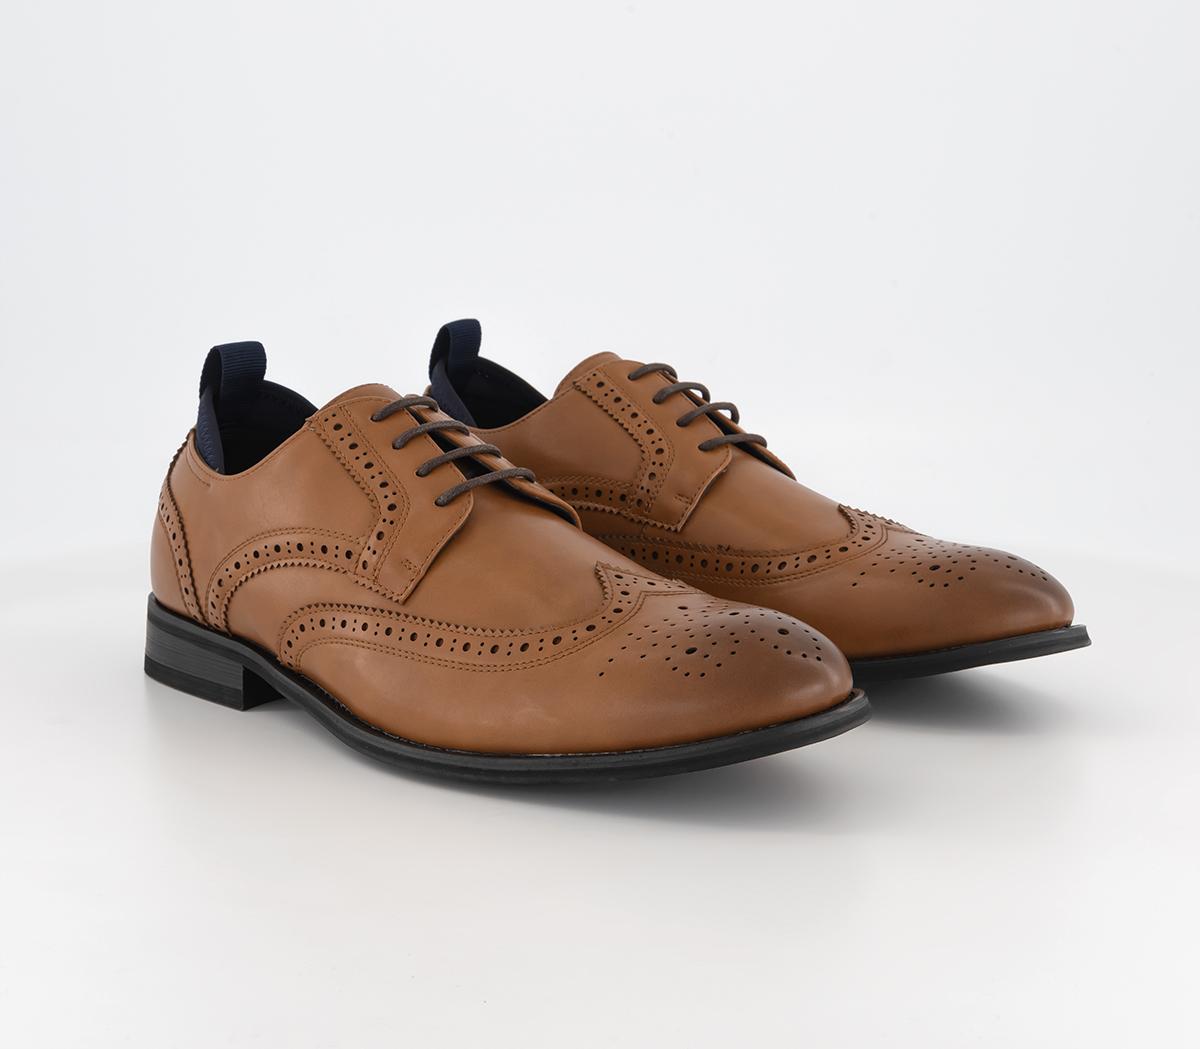 OFFICE Mens Montgomery Brogue Derby Shoes Tan, 11